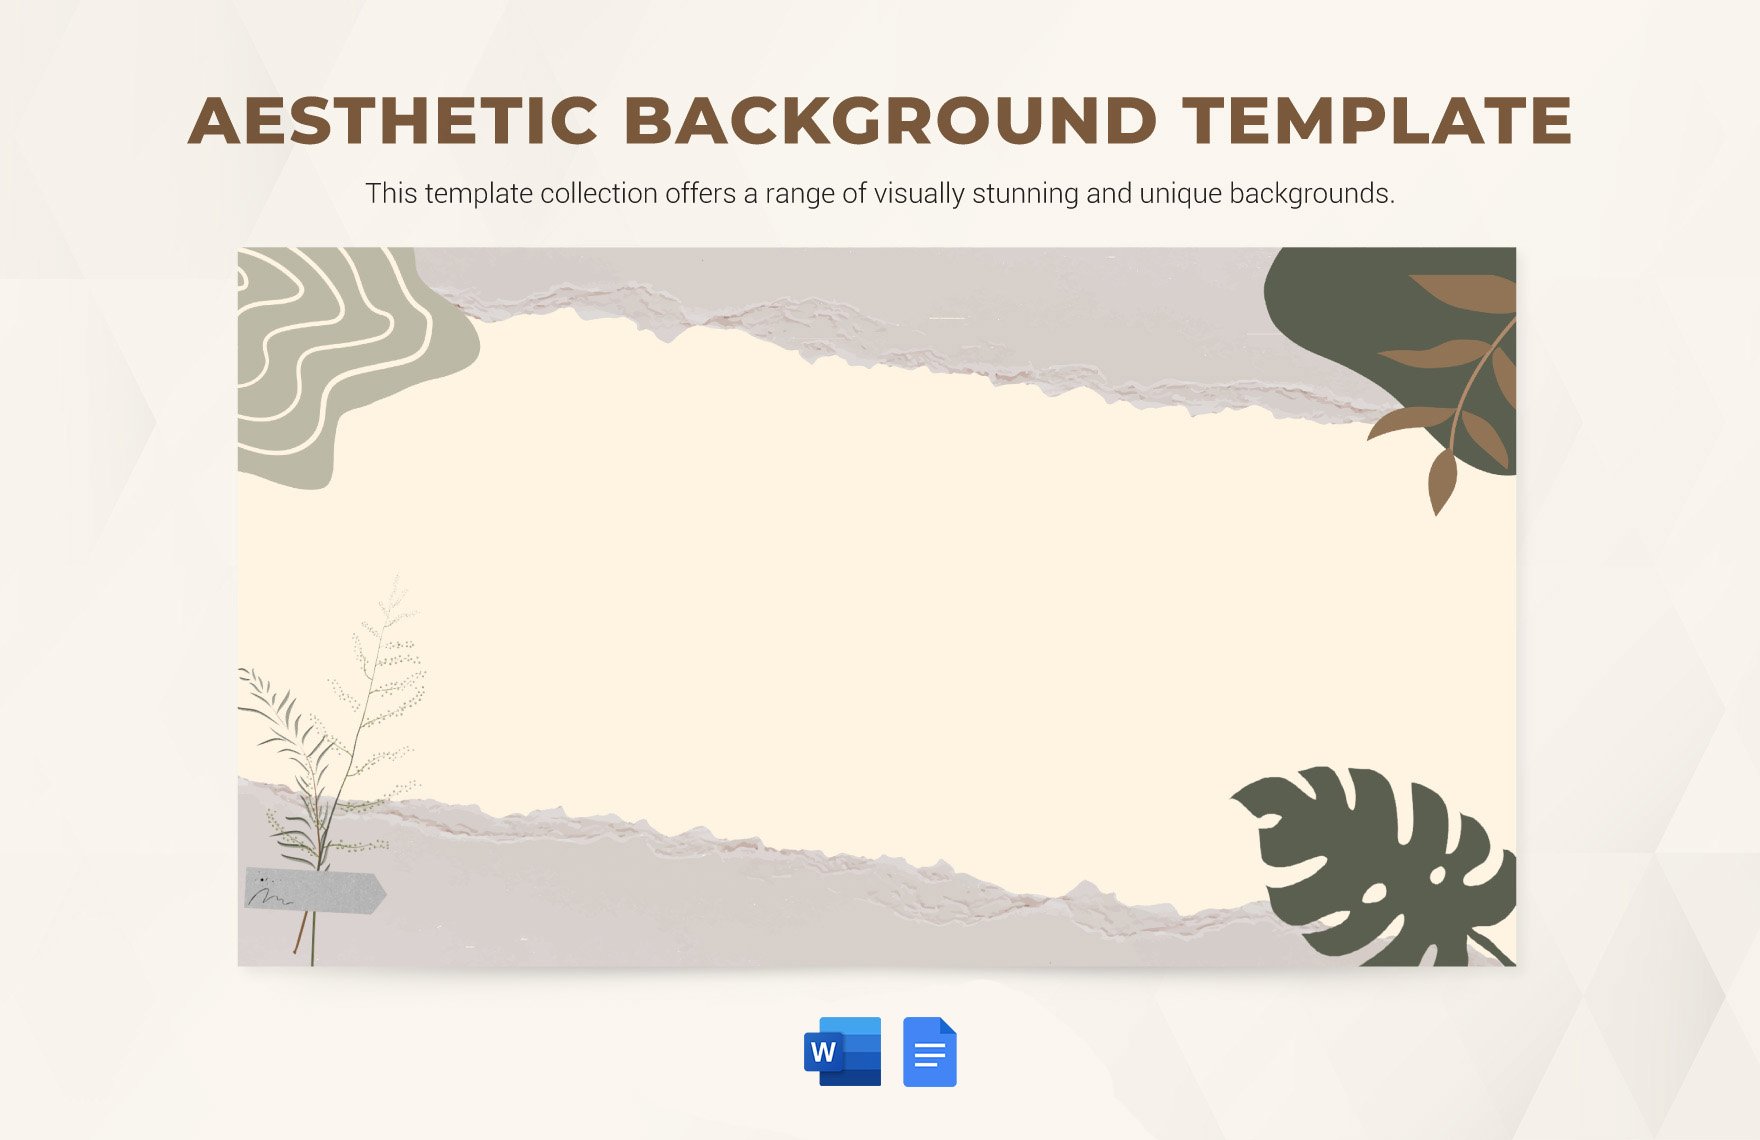 Aesthetic Background Template